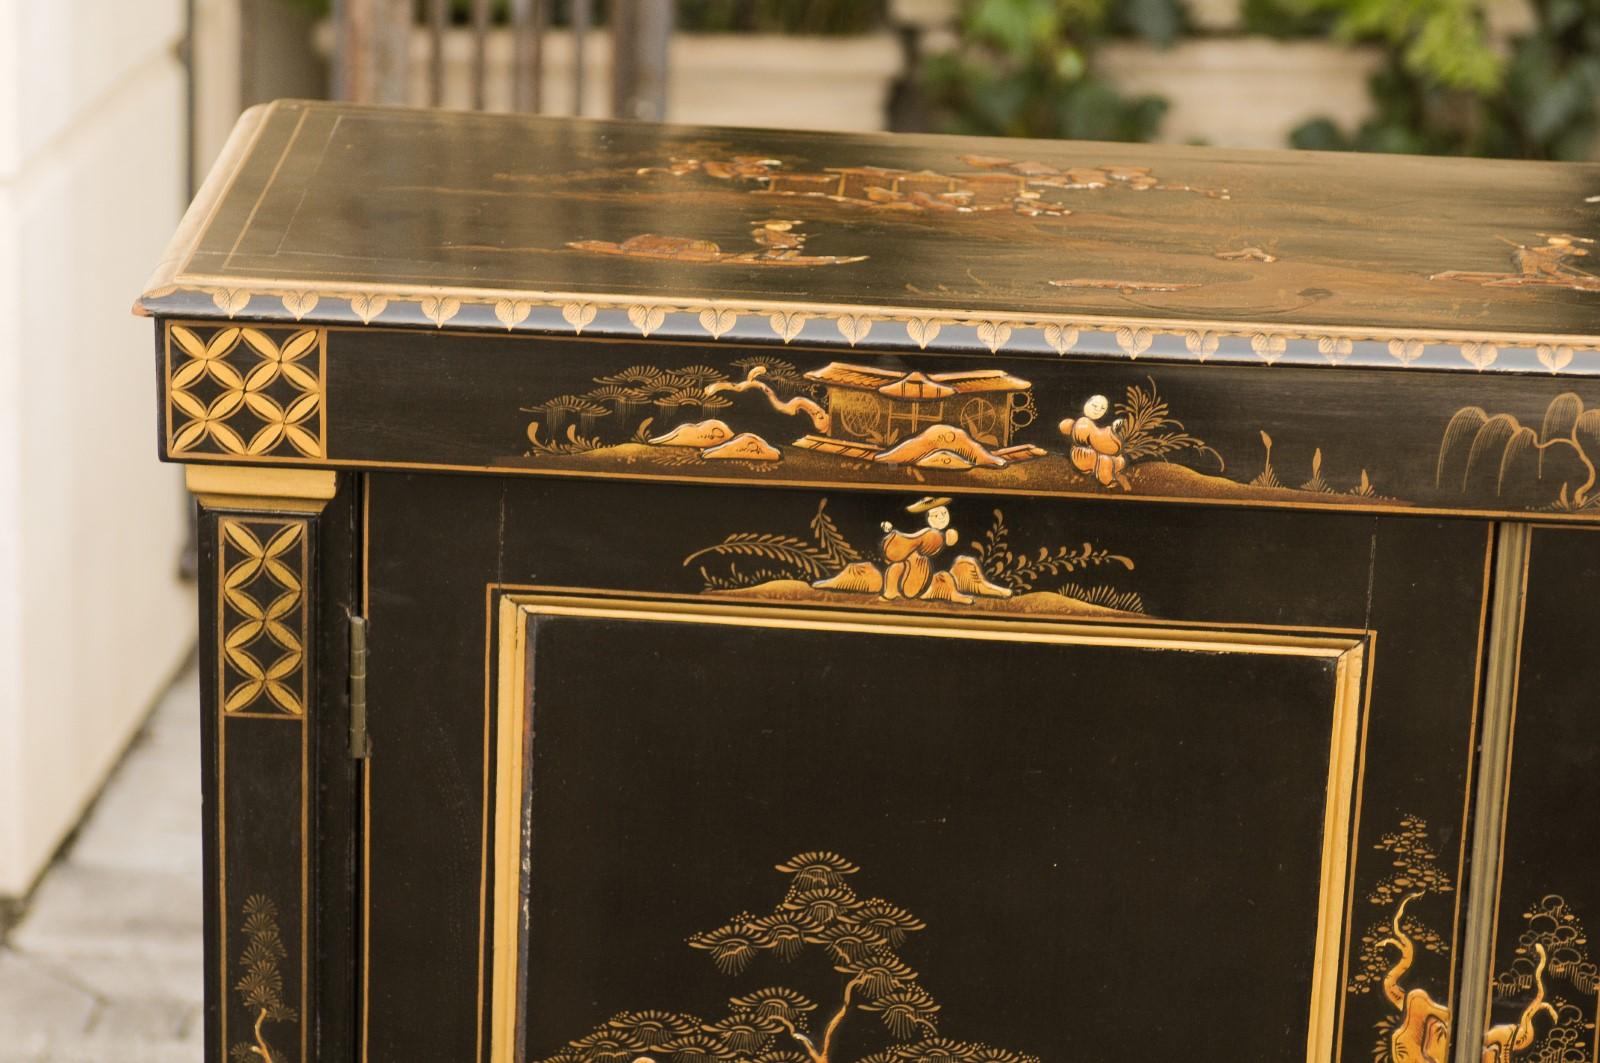 An English Japanned black buffet from the late 19th century, with hand painted chinoiserie decor. Born in the later years of the 19th century, this narrow two-door black colored buffet features a rectangular top with beveled edges, sitting above two